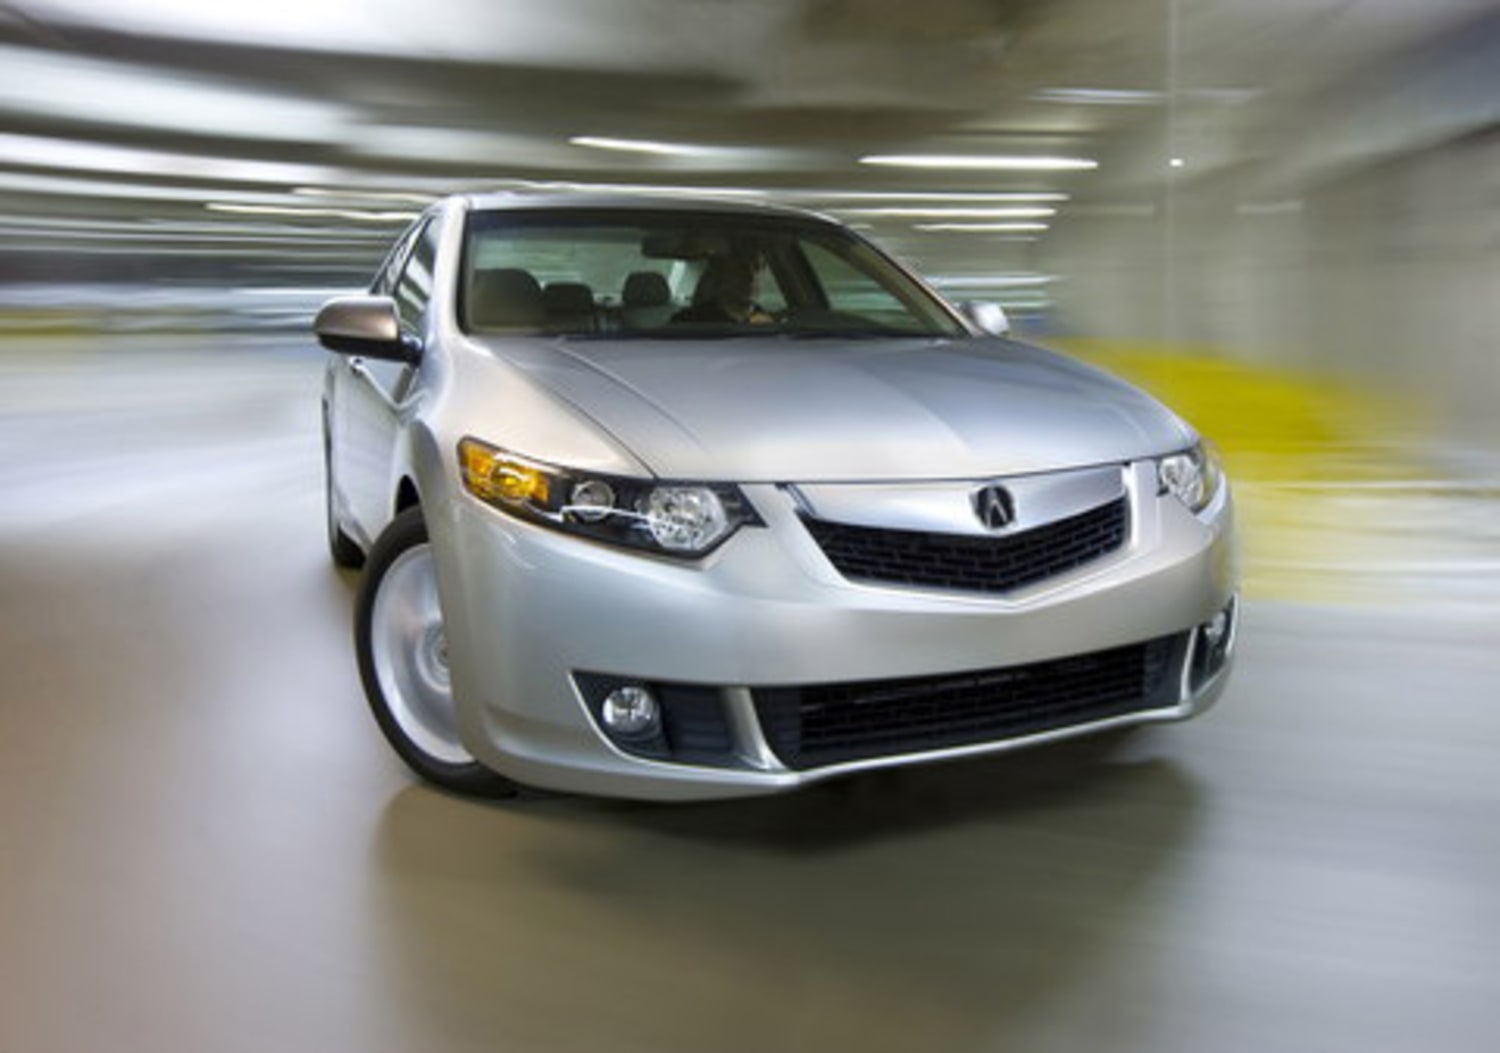 Performance-oriented Acura TSX muscles in